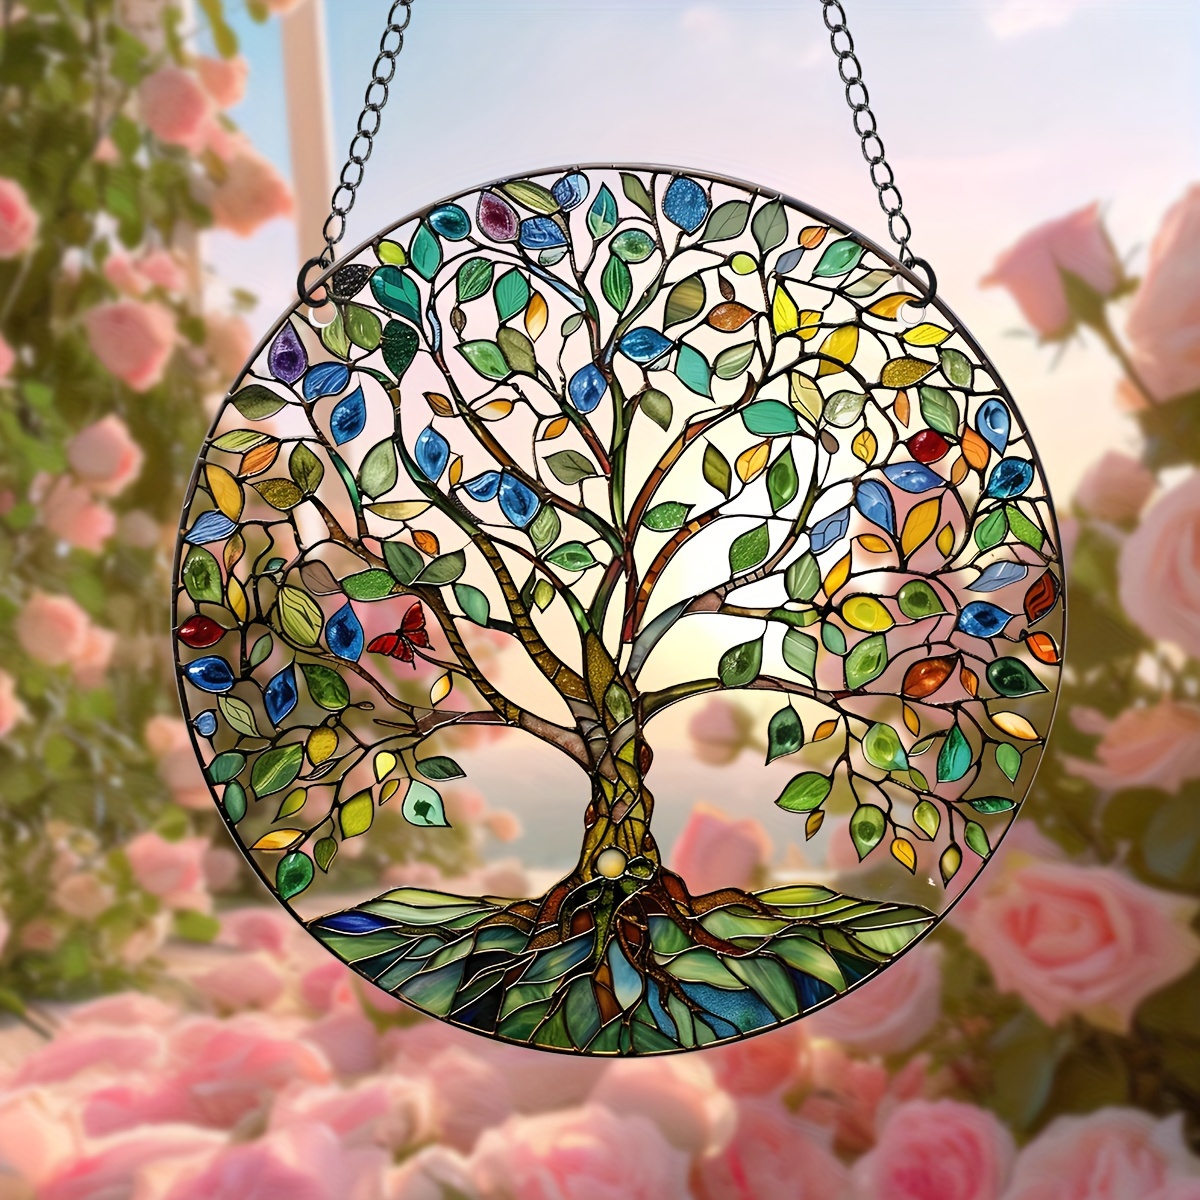 

Tree Of Life Acrylic Hanging Ornament - Colorful Transparent Round Pendant For Home & Garden Decor, Perfect Gift Idea, 5.9